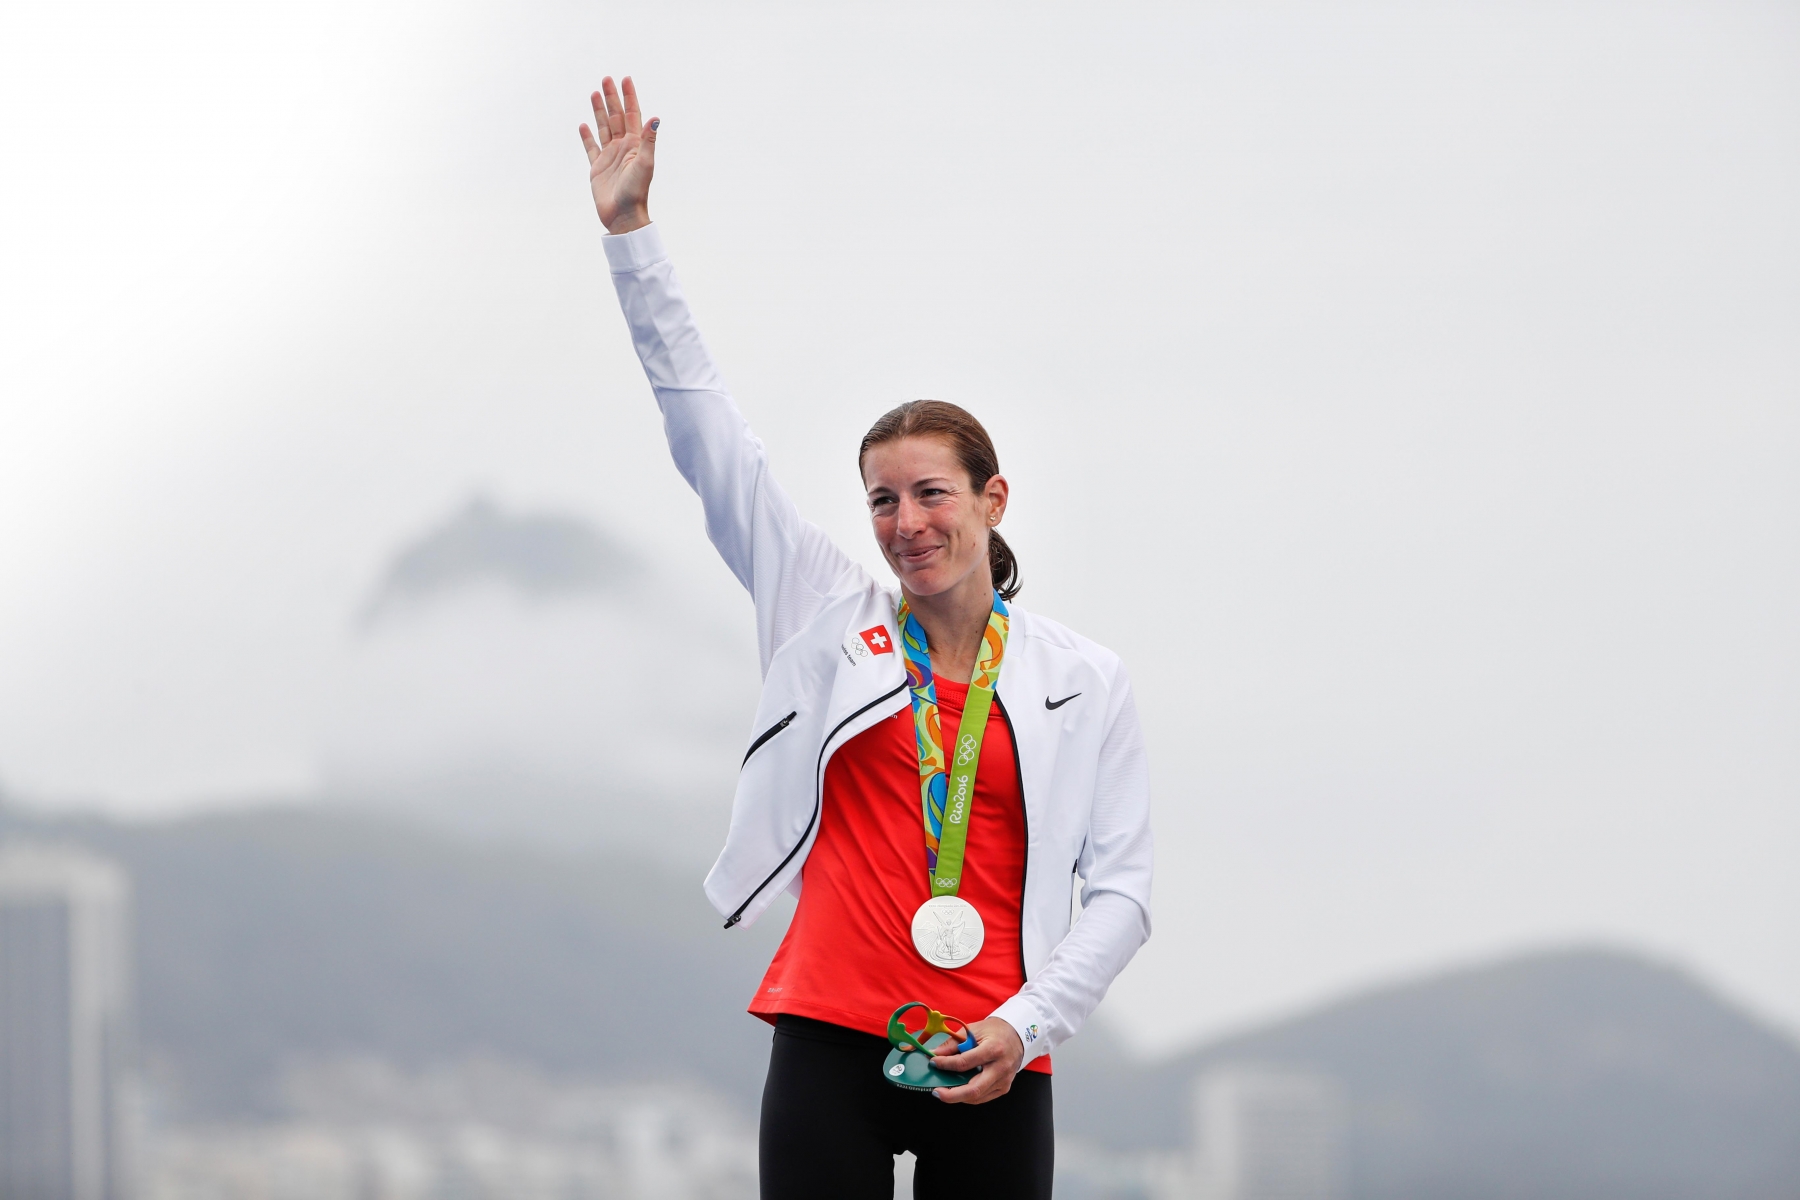 Silver medal winner Nicola Spirig of Switzerland reacts on the podium after the womenâÄÙs Triathlon in Fort Copacabana at the Rio 2016 Olympic Summer Games in Rio de Janeiro, Brazil, pictured on Saturday, August 20, 2016. (KEYSTONE/Peter Klaunzer) BRAZIL RIO OLYMPICS 2016 TRIATHLON TEAM SWITZERLAND